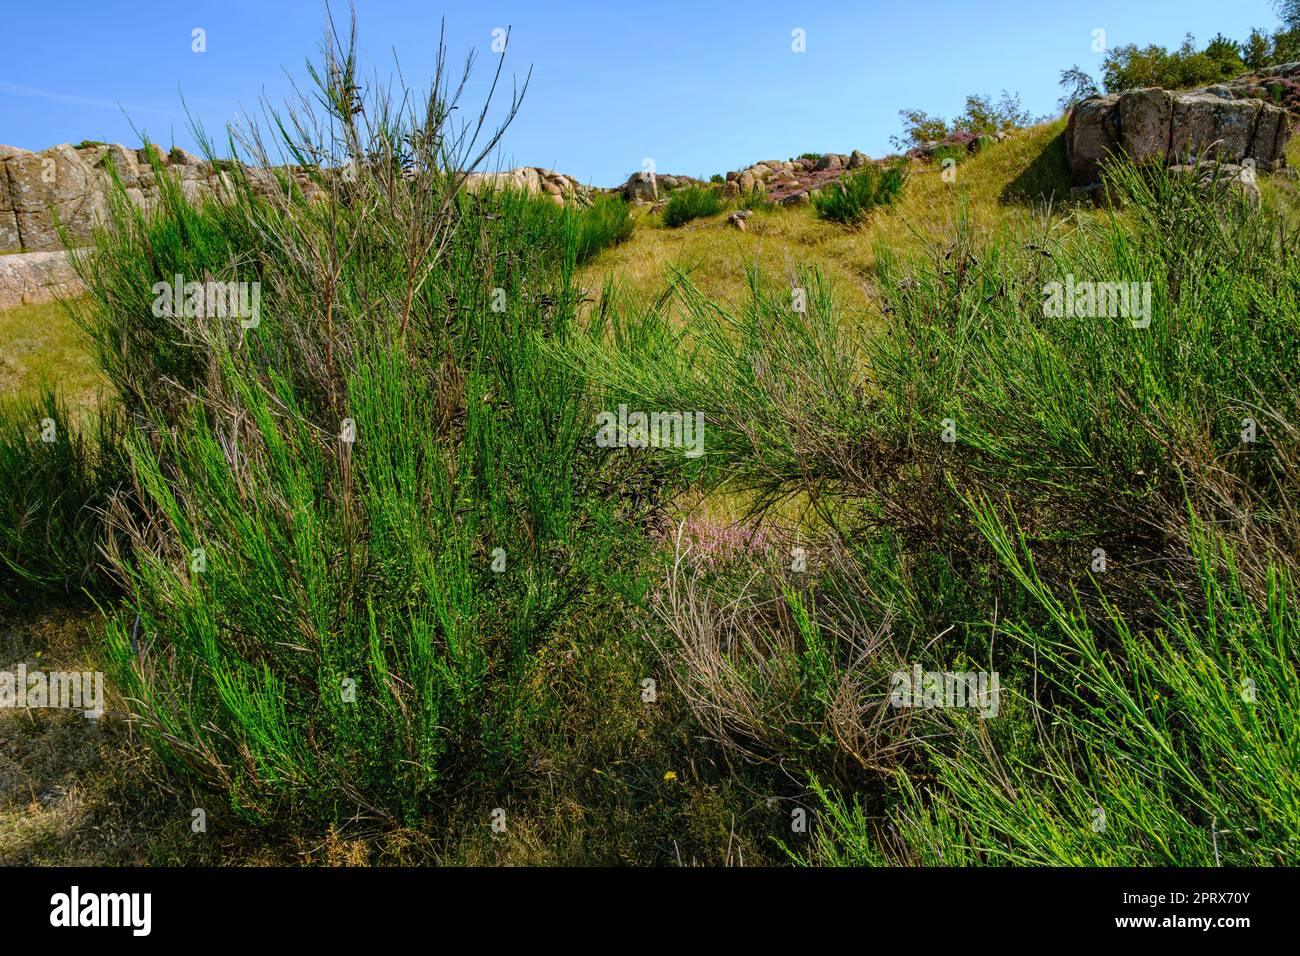 Broom bushes are part of the typical vegetation on the west coast of Hammeren headland at the northern tip of Bornholm Island, Denmark, Scandinavia. Stock Photo